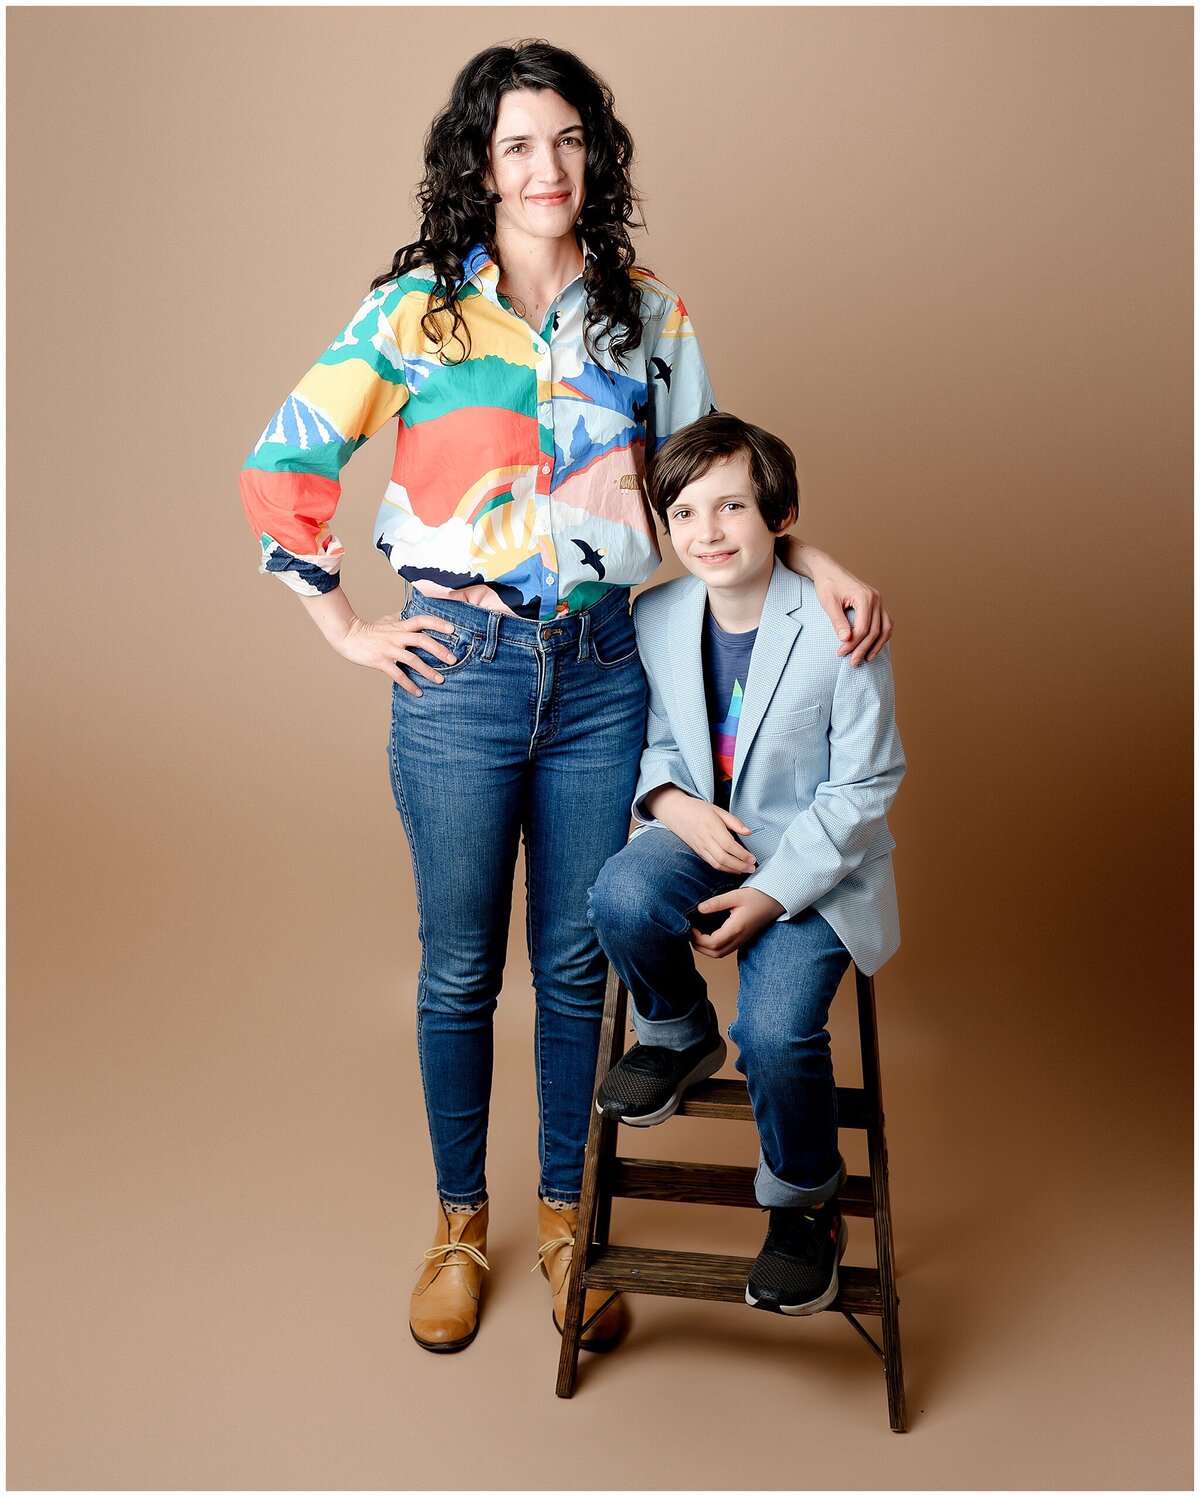 Mom posed standing with hand on son sitting on a step ladder prop.